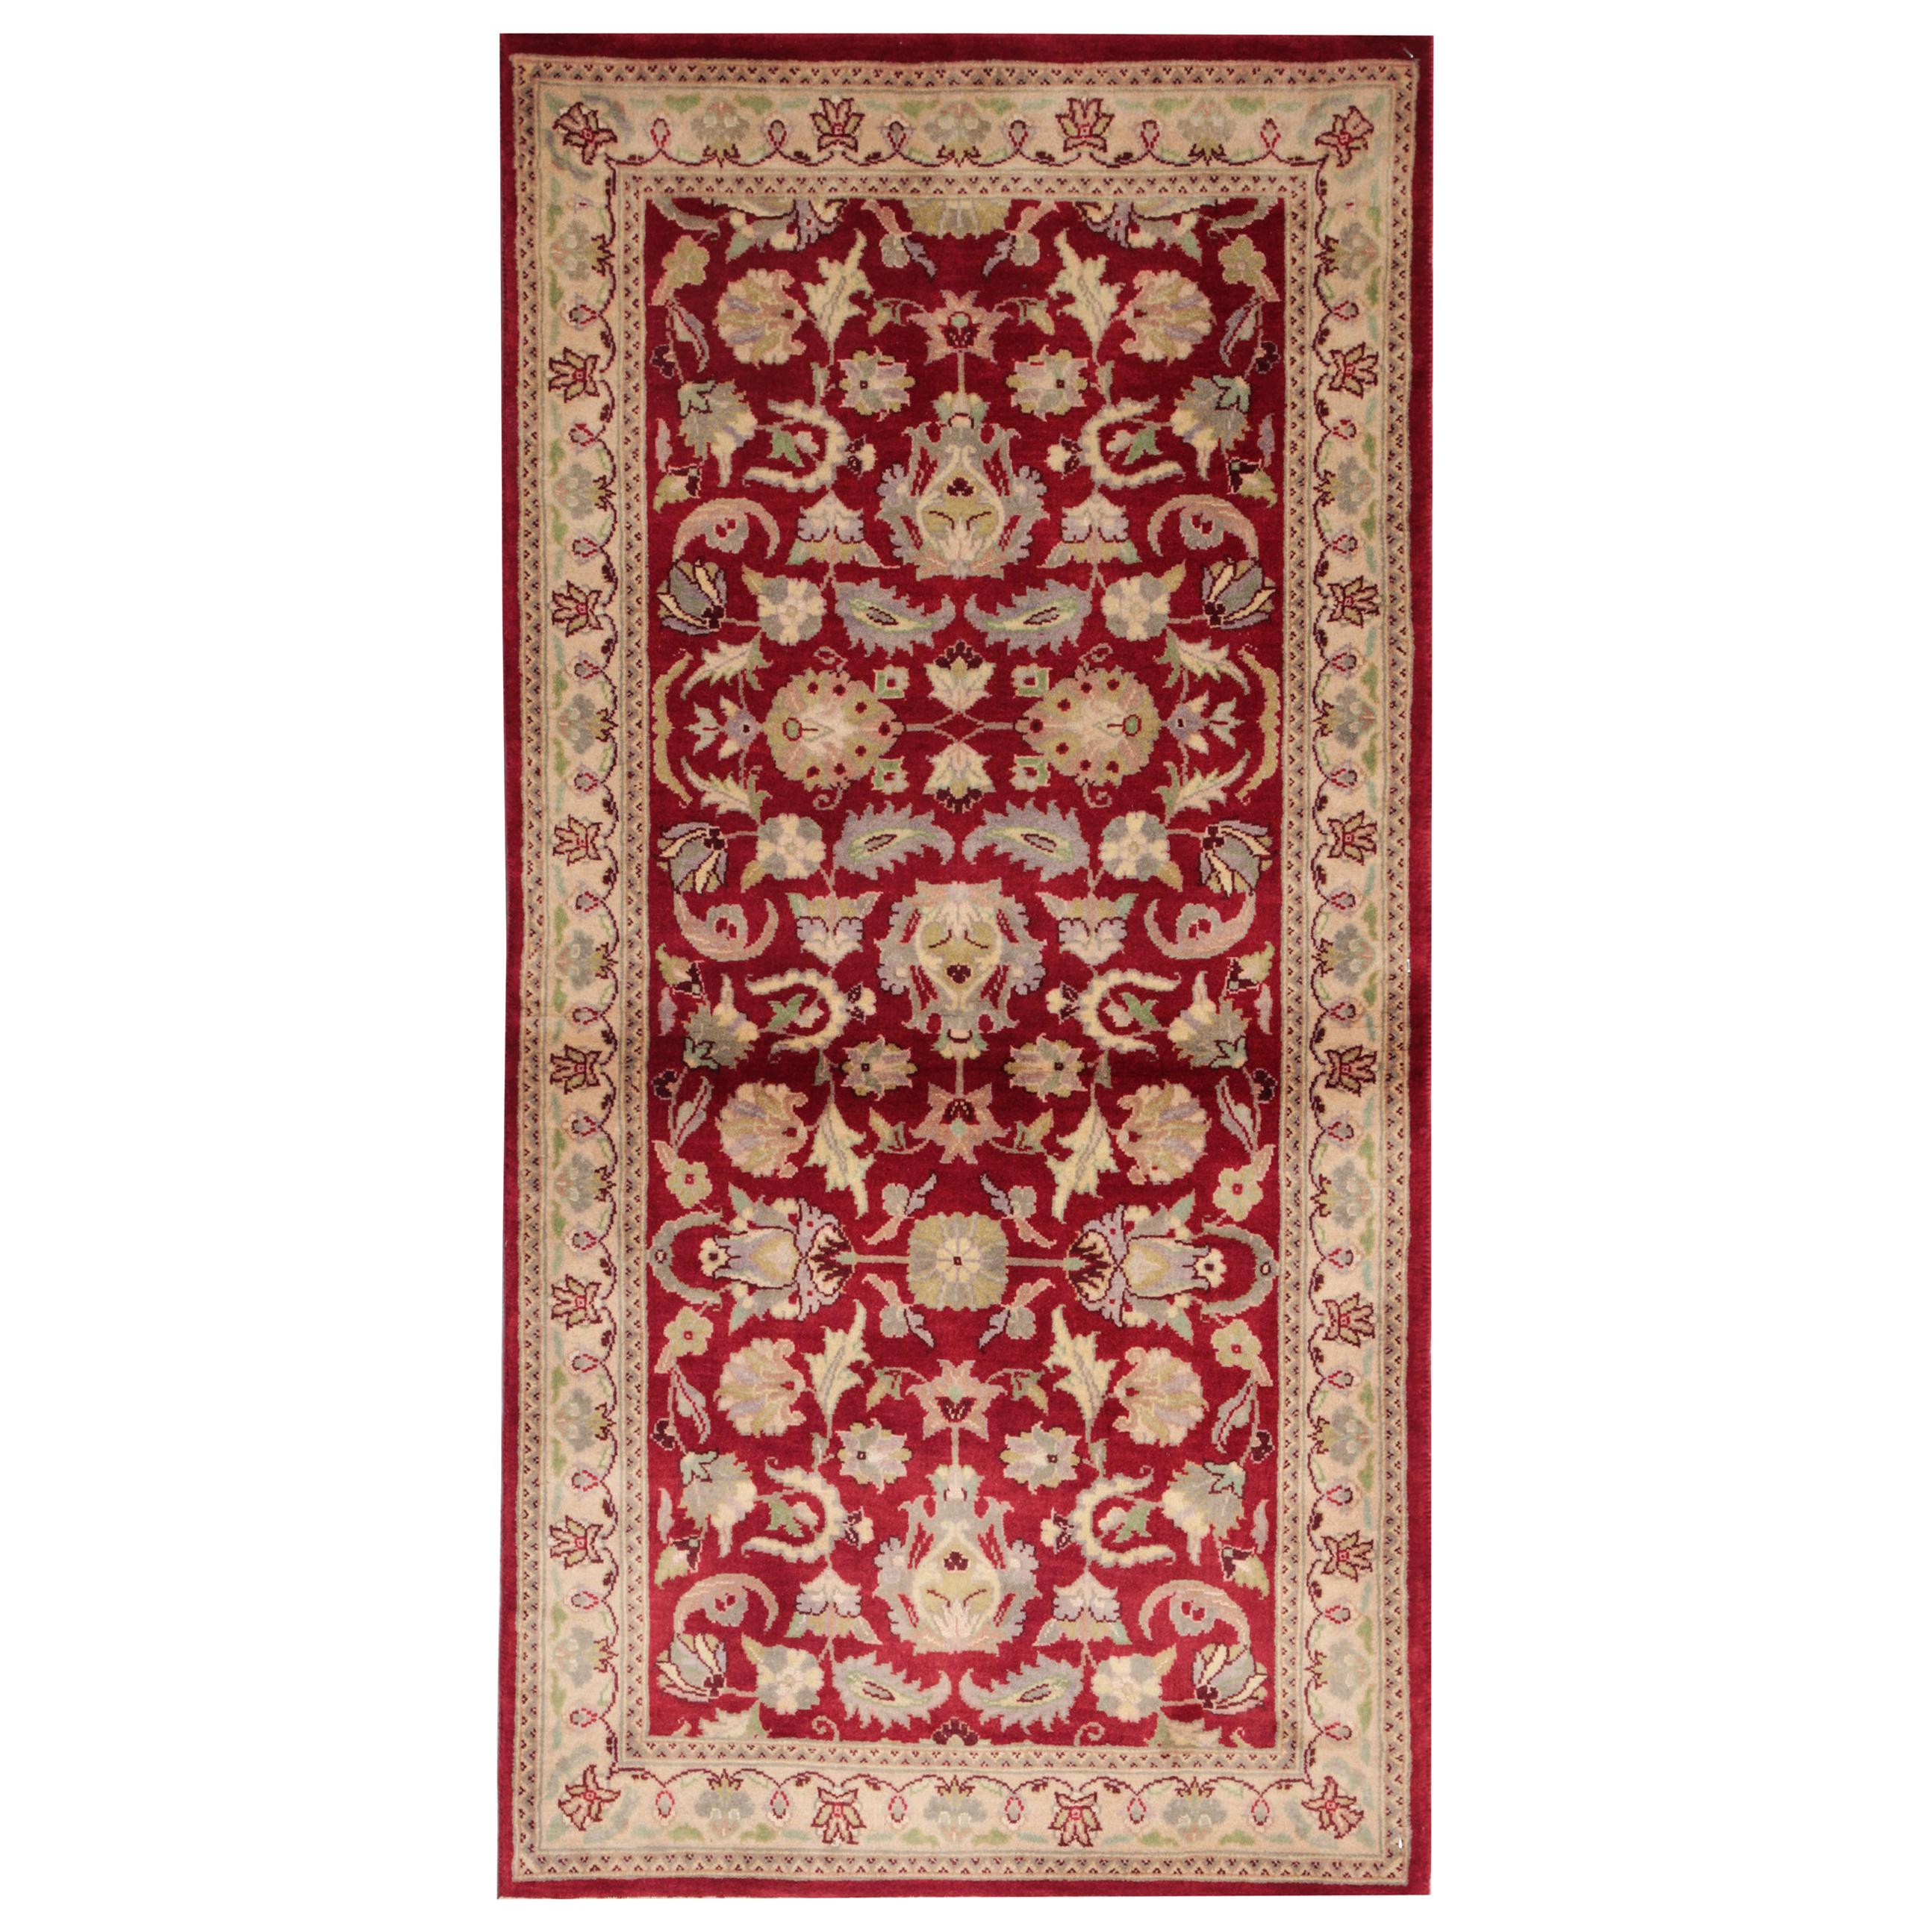 Traditional Area Rugs, Ziegler Style Carpet Red Rug, Floor Rugs for Sale 